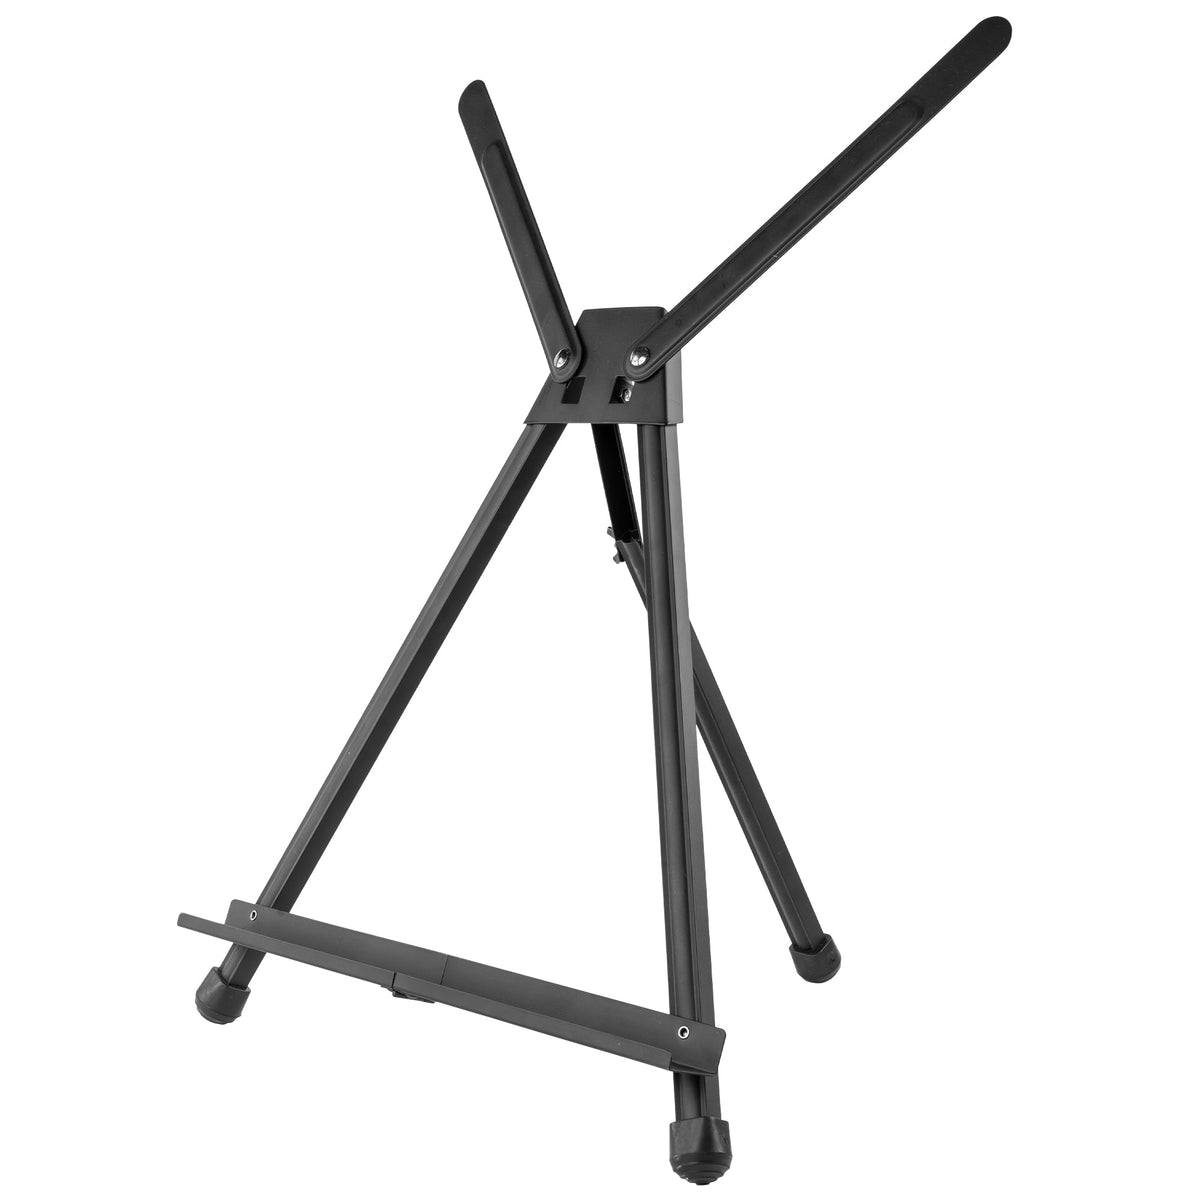 Pacific Arc, Rover Aluminum 20 Inch Adjustable Art Easel with Carrying Case